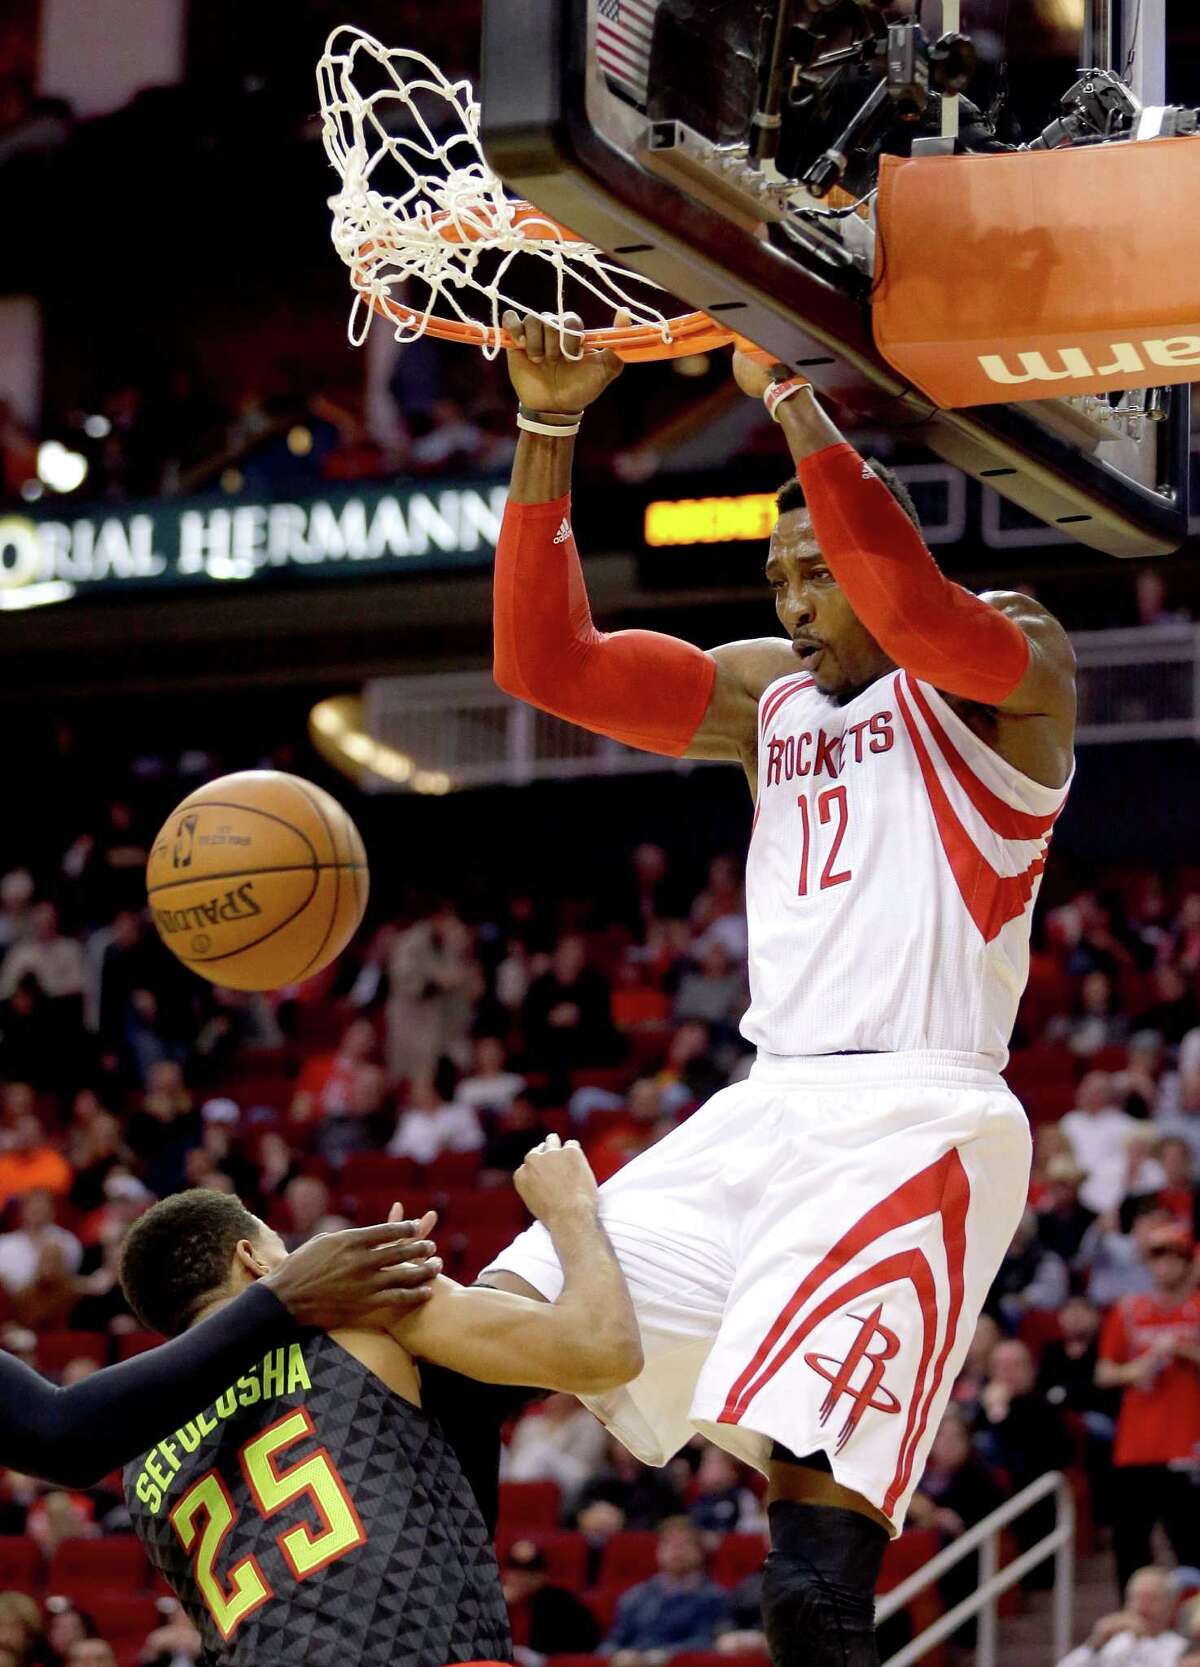 FILE - In this Dec. 29, 2015, file photo, Houston Rockets' Dwight Howard (12) dunks the ball as Atlanta Hawks' Thabo Sefolosha (25) tries to move out of the way during the first quarter of an NBA basketball game, in Houston. Rockets general manager Daryl Morey has always been one of the most aggressive dealmakers in the league, and with Howard having the ability to become a free agent this summer, it might be time to part ways.(AP Photo/David J. Phillip, File)